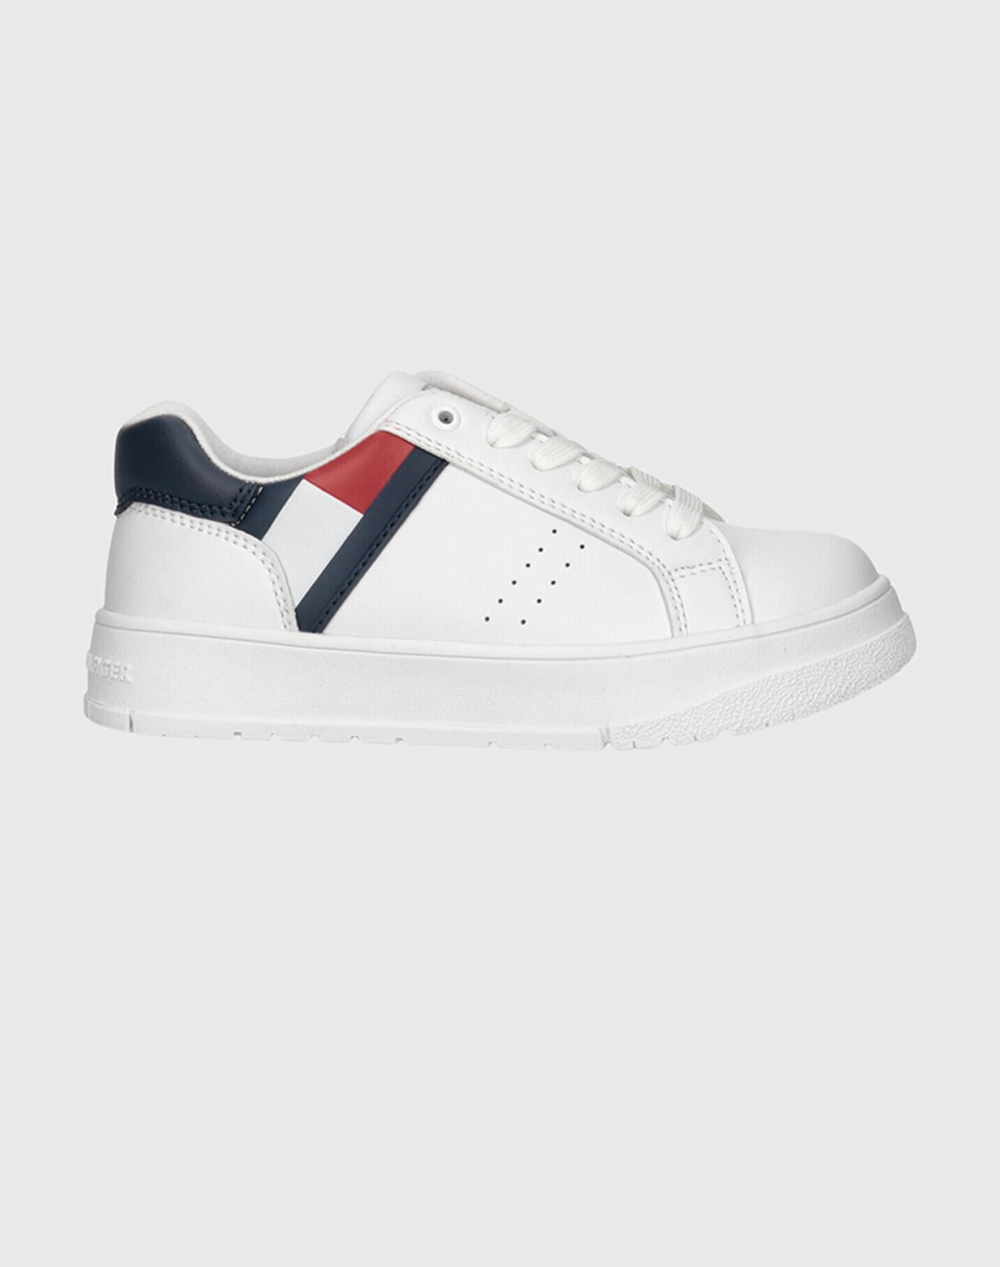 TOMMY HILFIGER FLAG LOW CUT LACE-UP SNEAKER T3X9-33356-1355 35-39-100 White 3832ATOMM6070042_XR22414